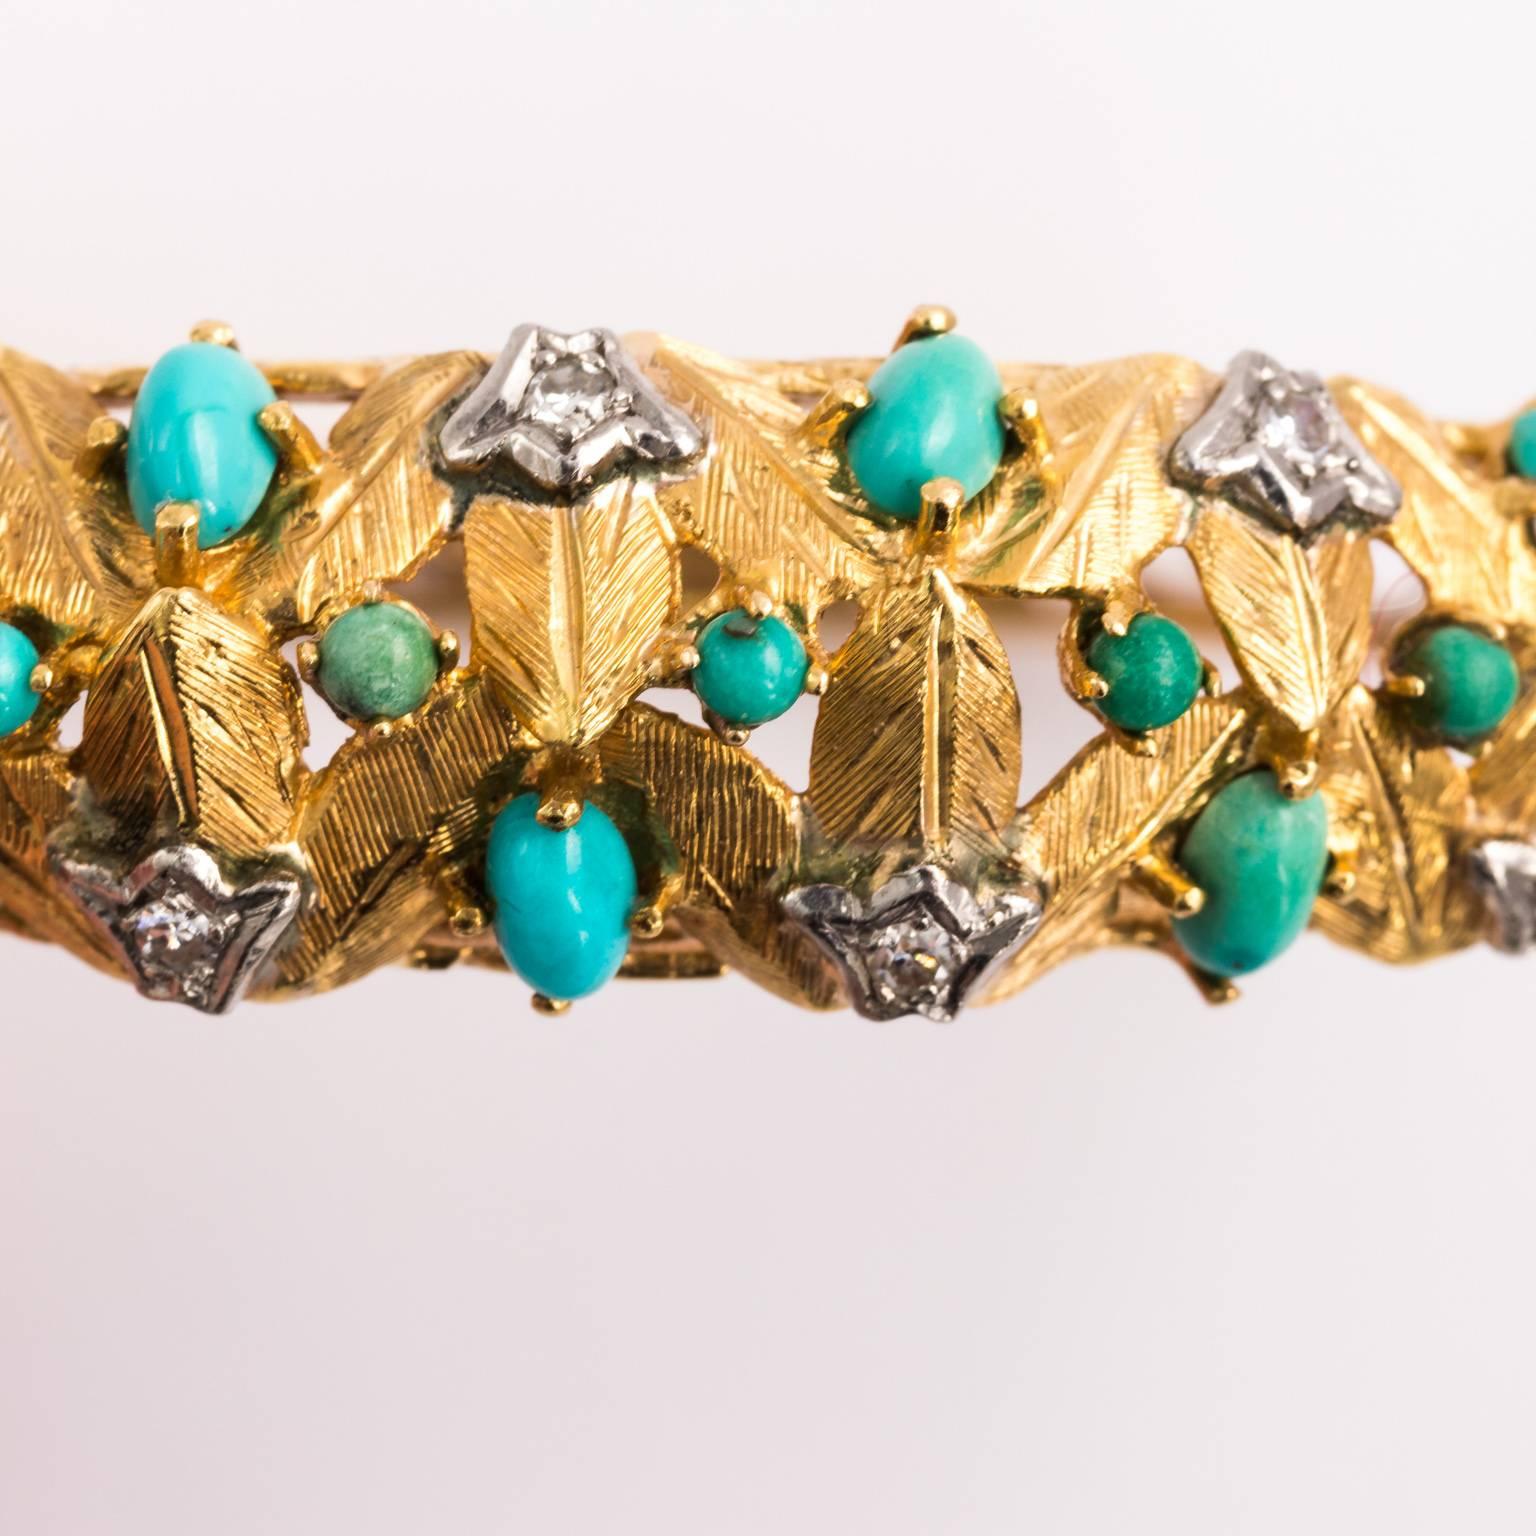 Gold and Turquoise Cuff Bracelet 7